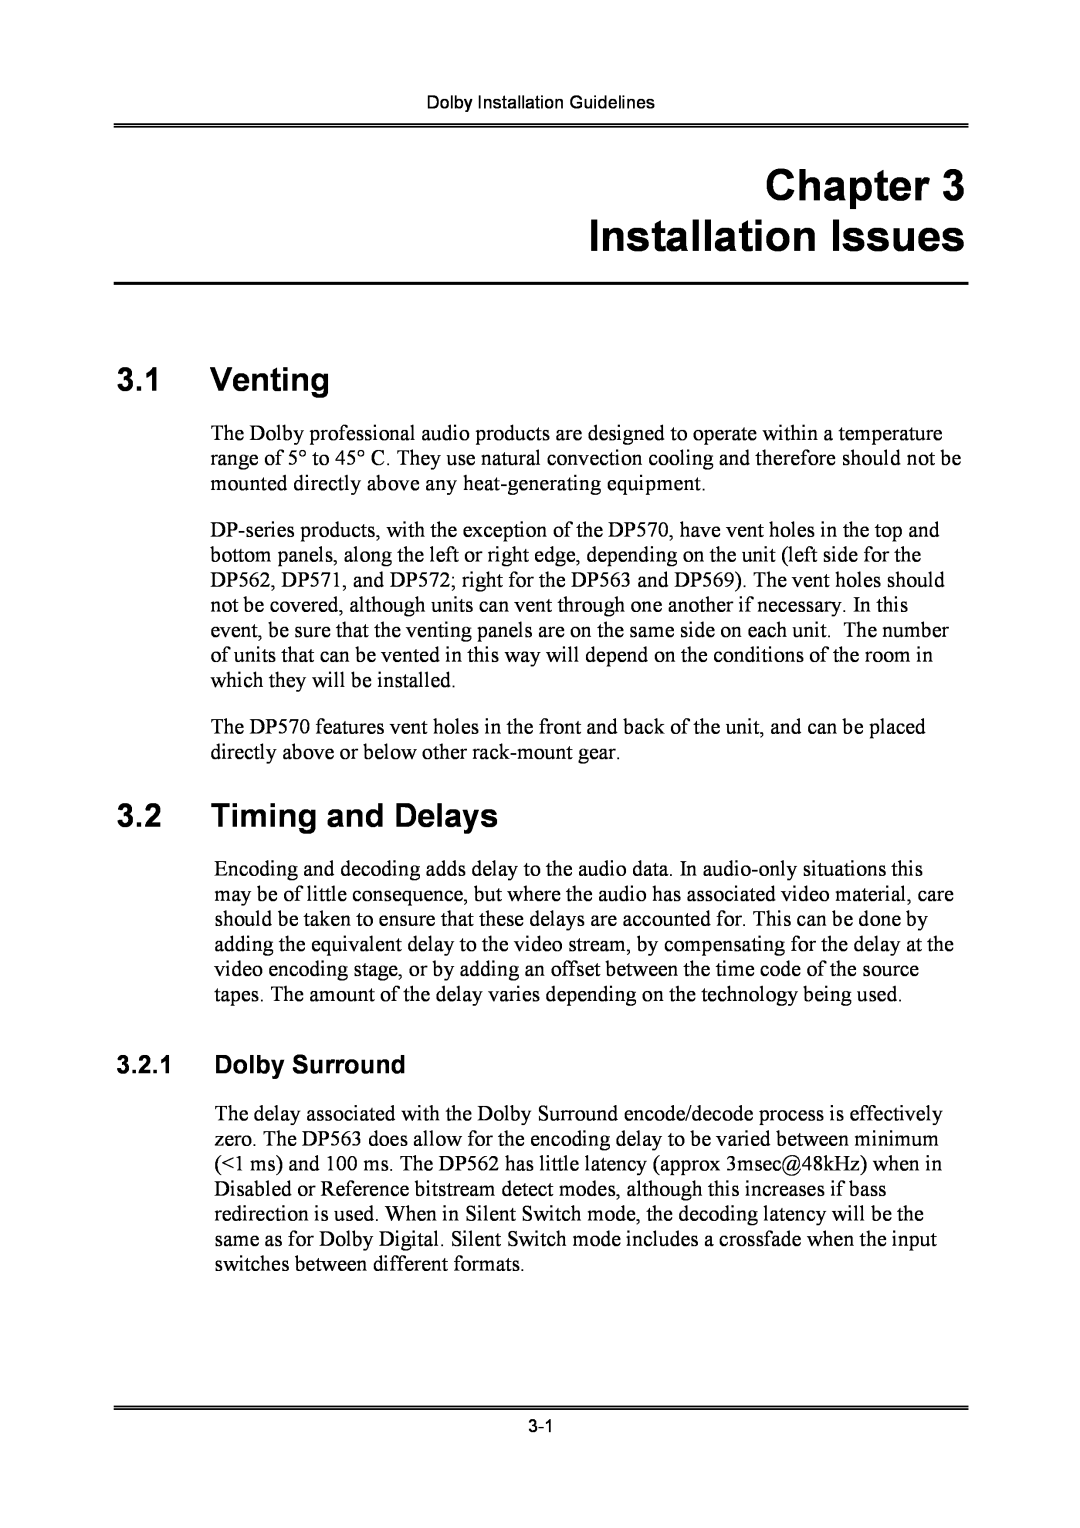 Dolby Laboratories S01/13621 manual Chapter Installation Issues, 3.1Venting, 3.2Timing and Delays, 3.2.1Dolby Surround 